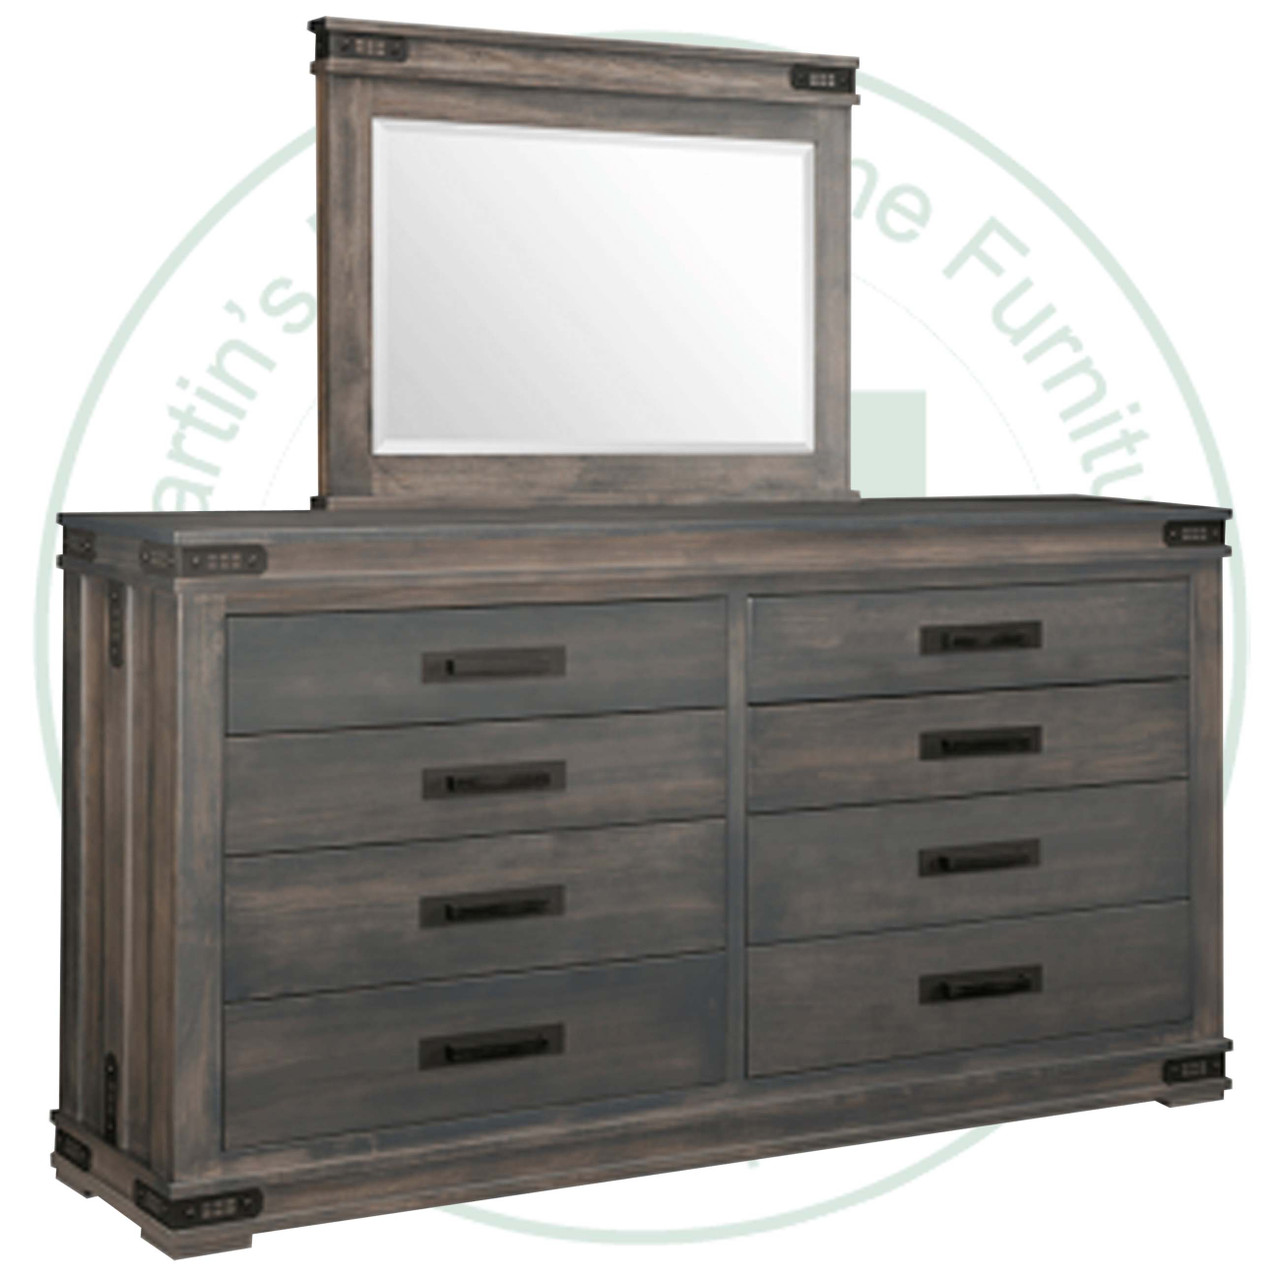 Wormy Maple Gastown Long High Dresser 18.5''D x 72.5''W x 44.5''H With 8 Drawers